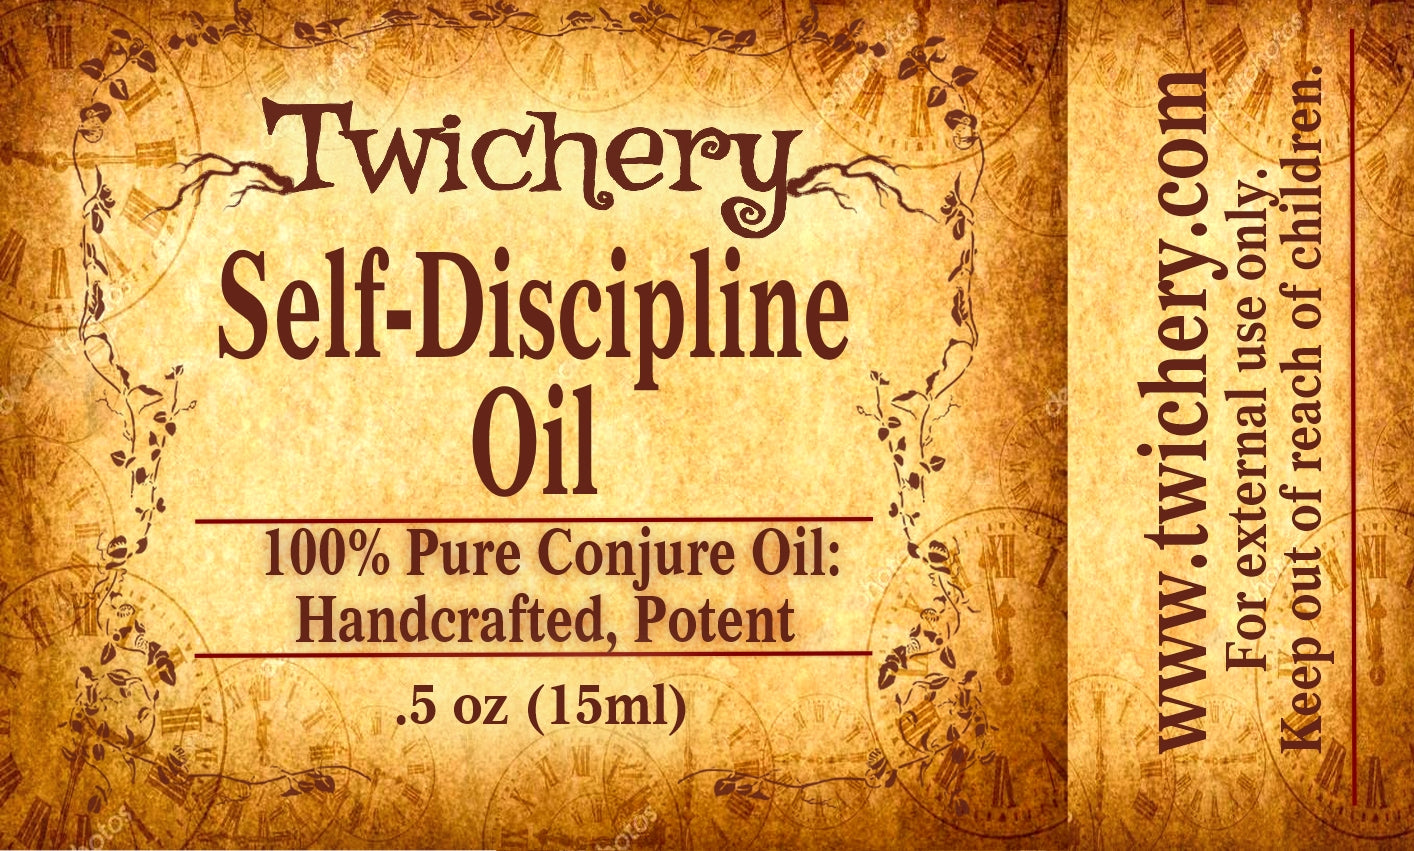 Self-Discipline Oil: Set Your Goal and Stick to It!